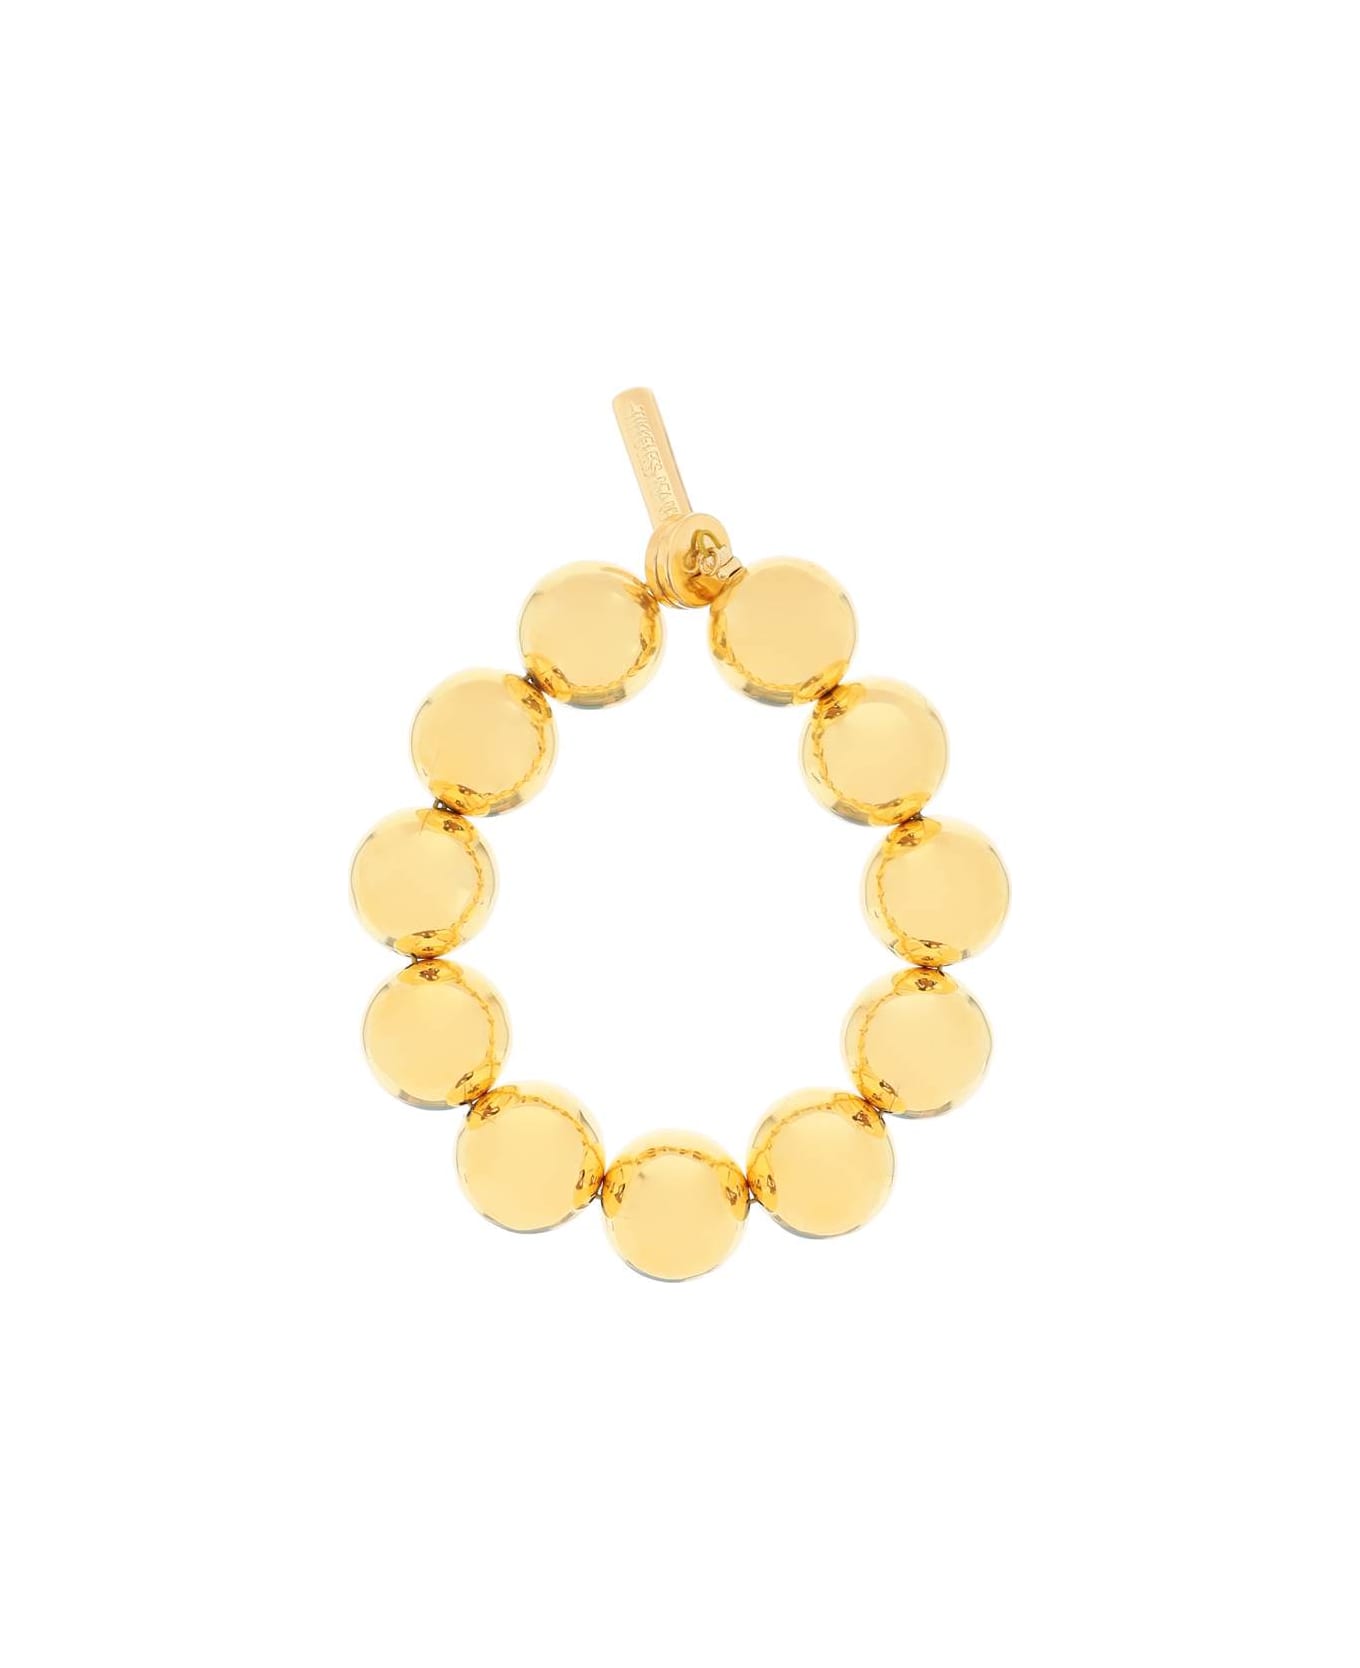 Timeless Pearly Bracelet With Balls - GOLD (Gold)